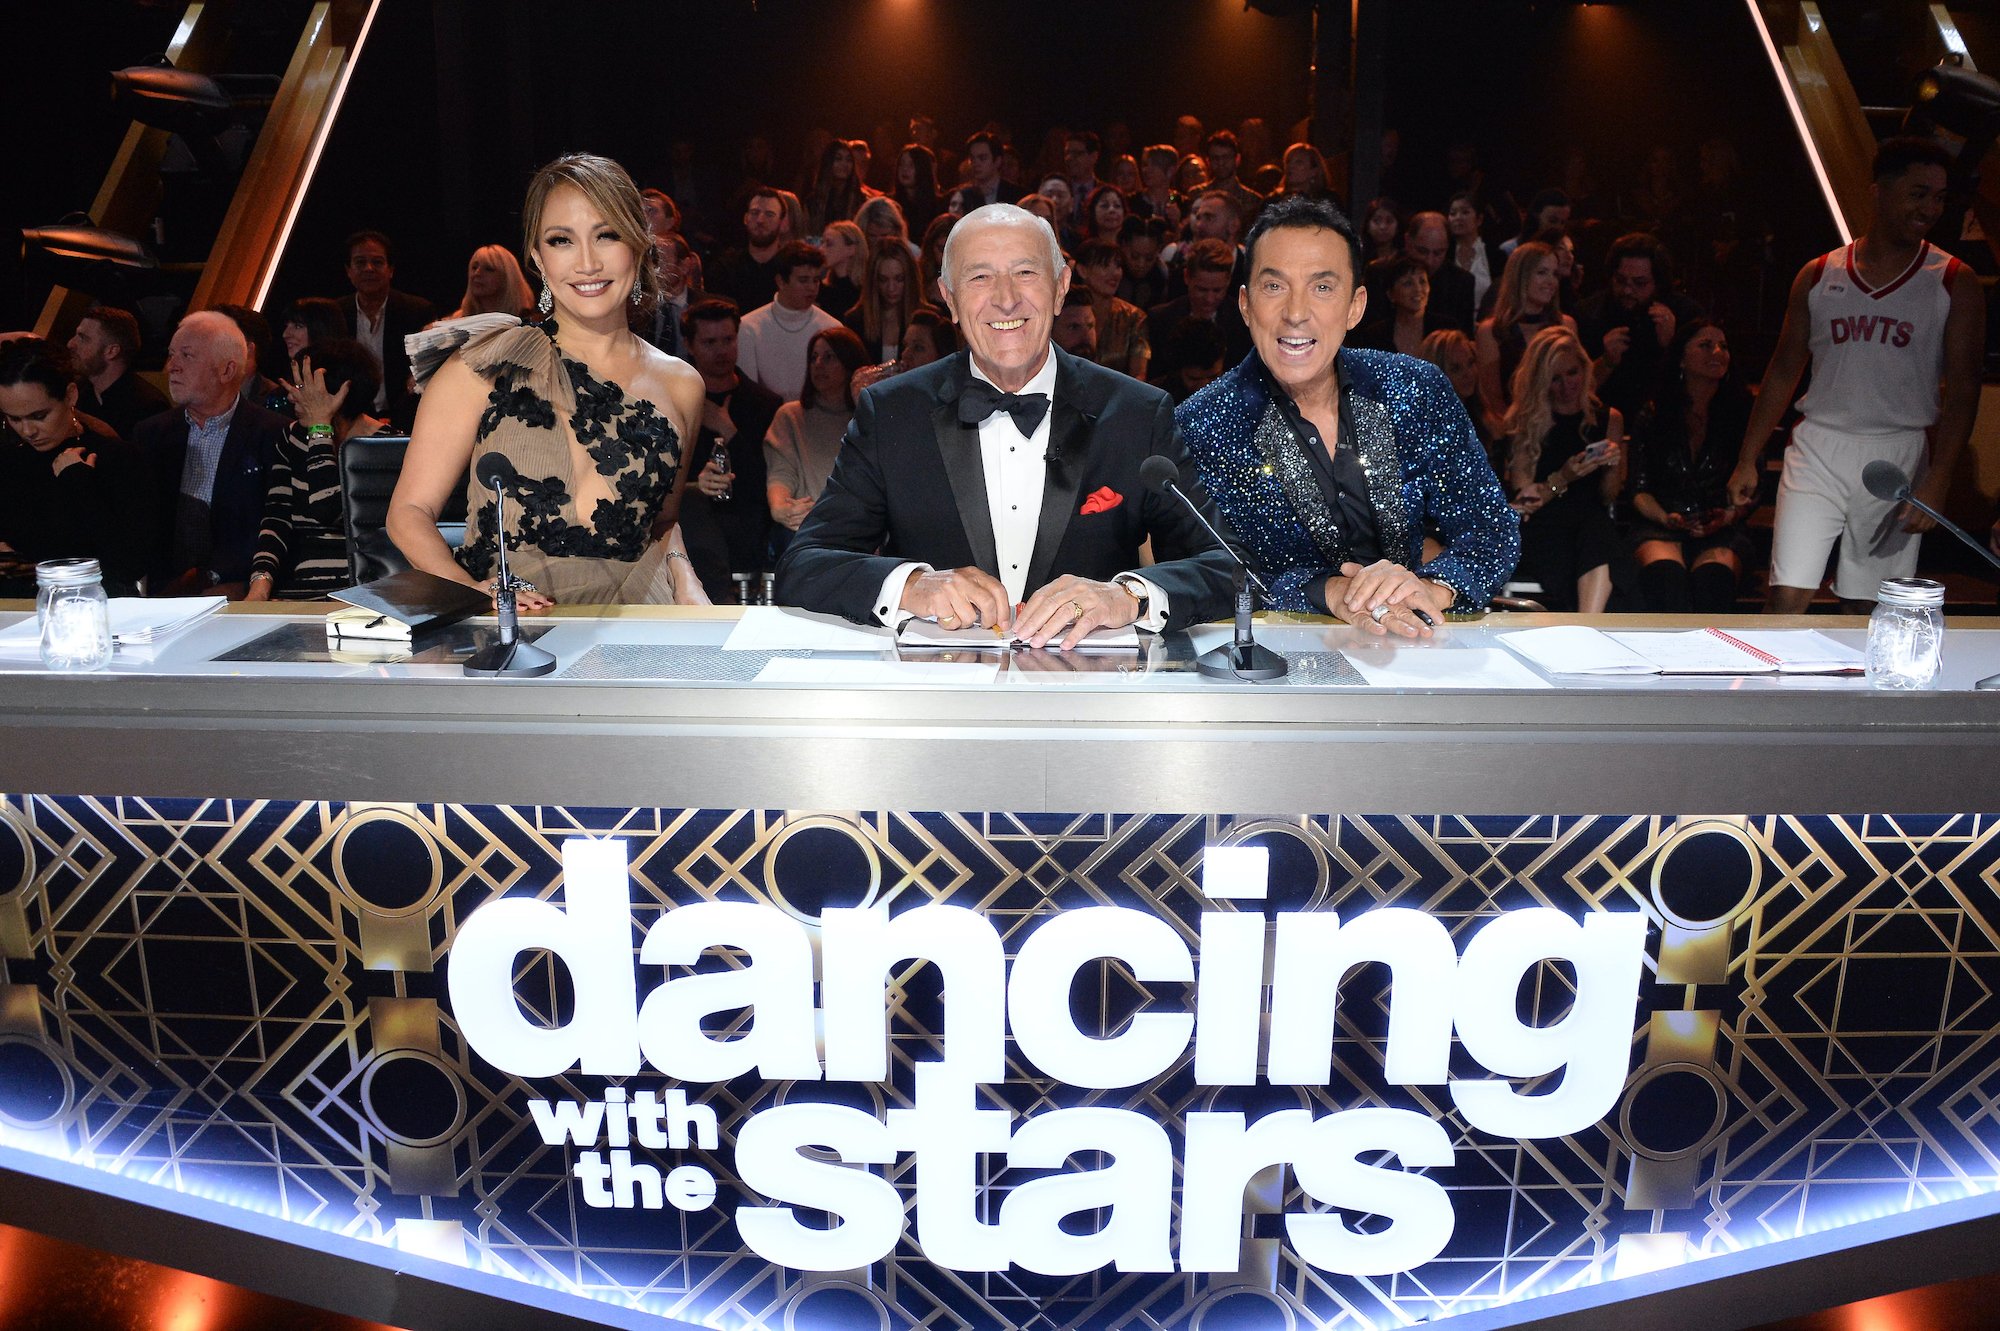 Carrie Ann Inaba, Len Goodman, and Bruno Tonioli sit at the judges table on the set of 'Dancing With the Stars'